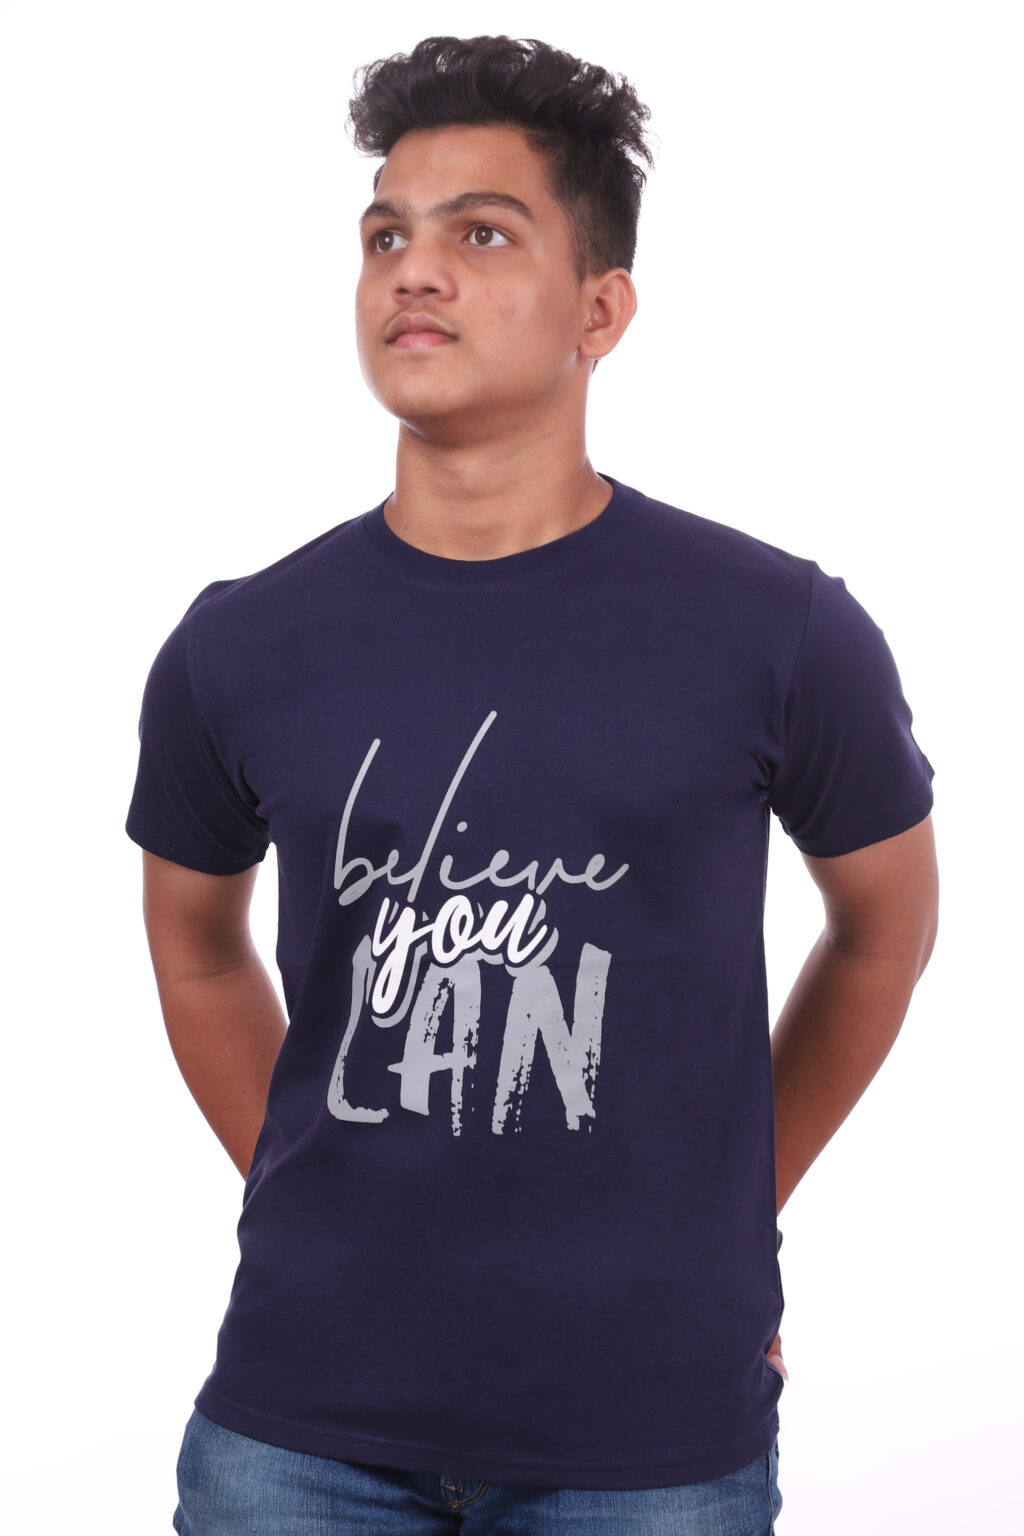 Graphics Quoted T-shirt With IIT Roorkee Logo - AlwaysIITian